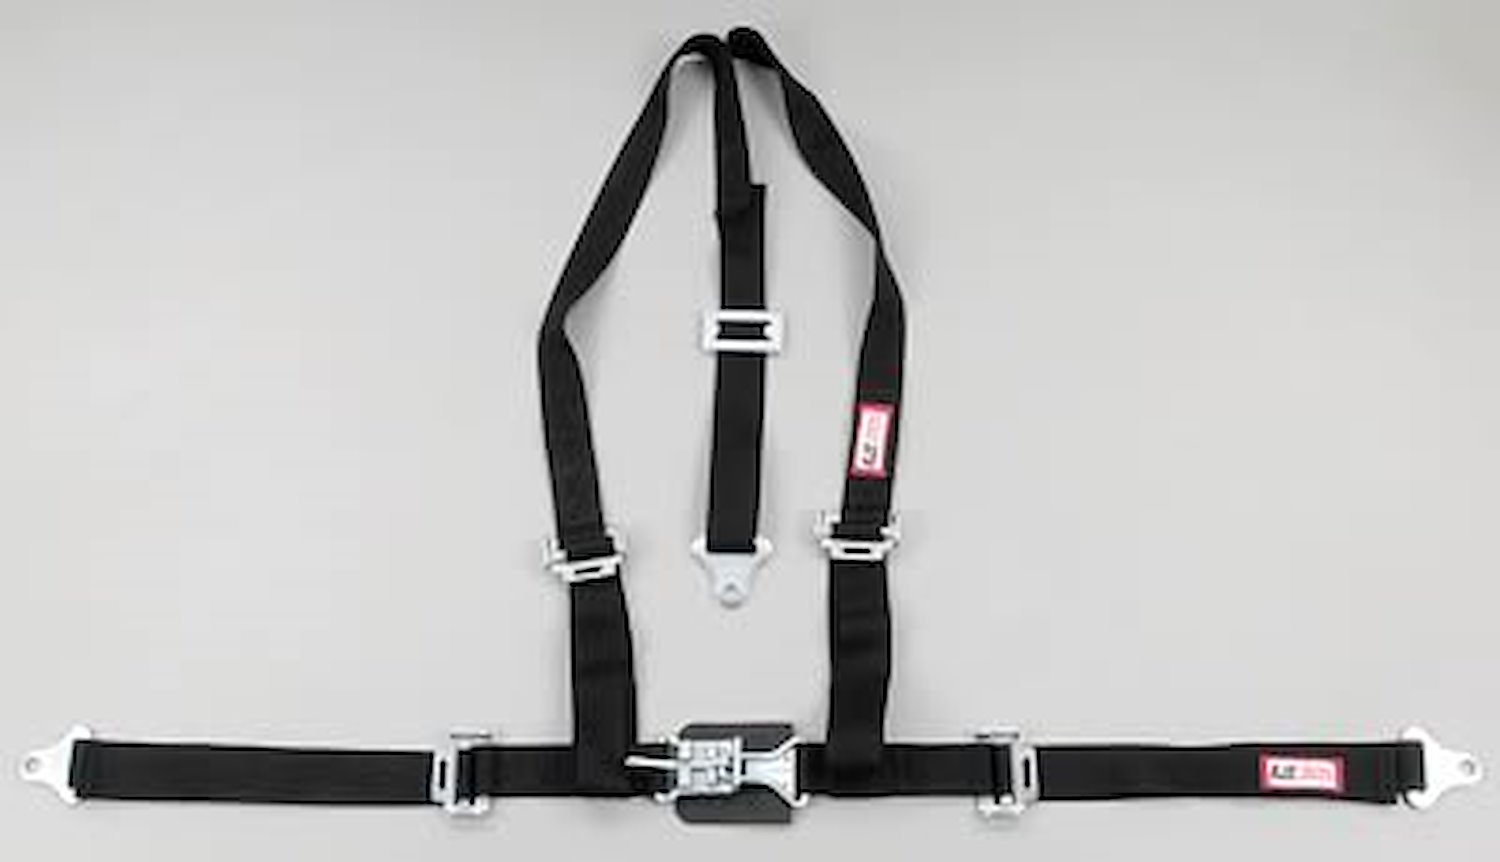 NON-SFI L&L HARNESS 2 PULL UP Lap Belt SEWN IN 2 S.H. Individual ROLL BAR Mount ALL WRAP ENDS GRAY